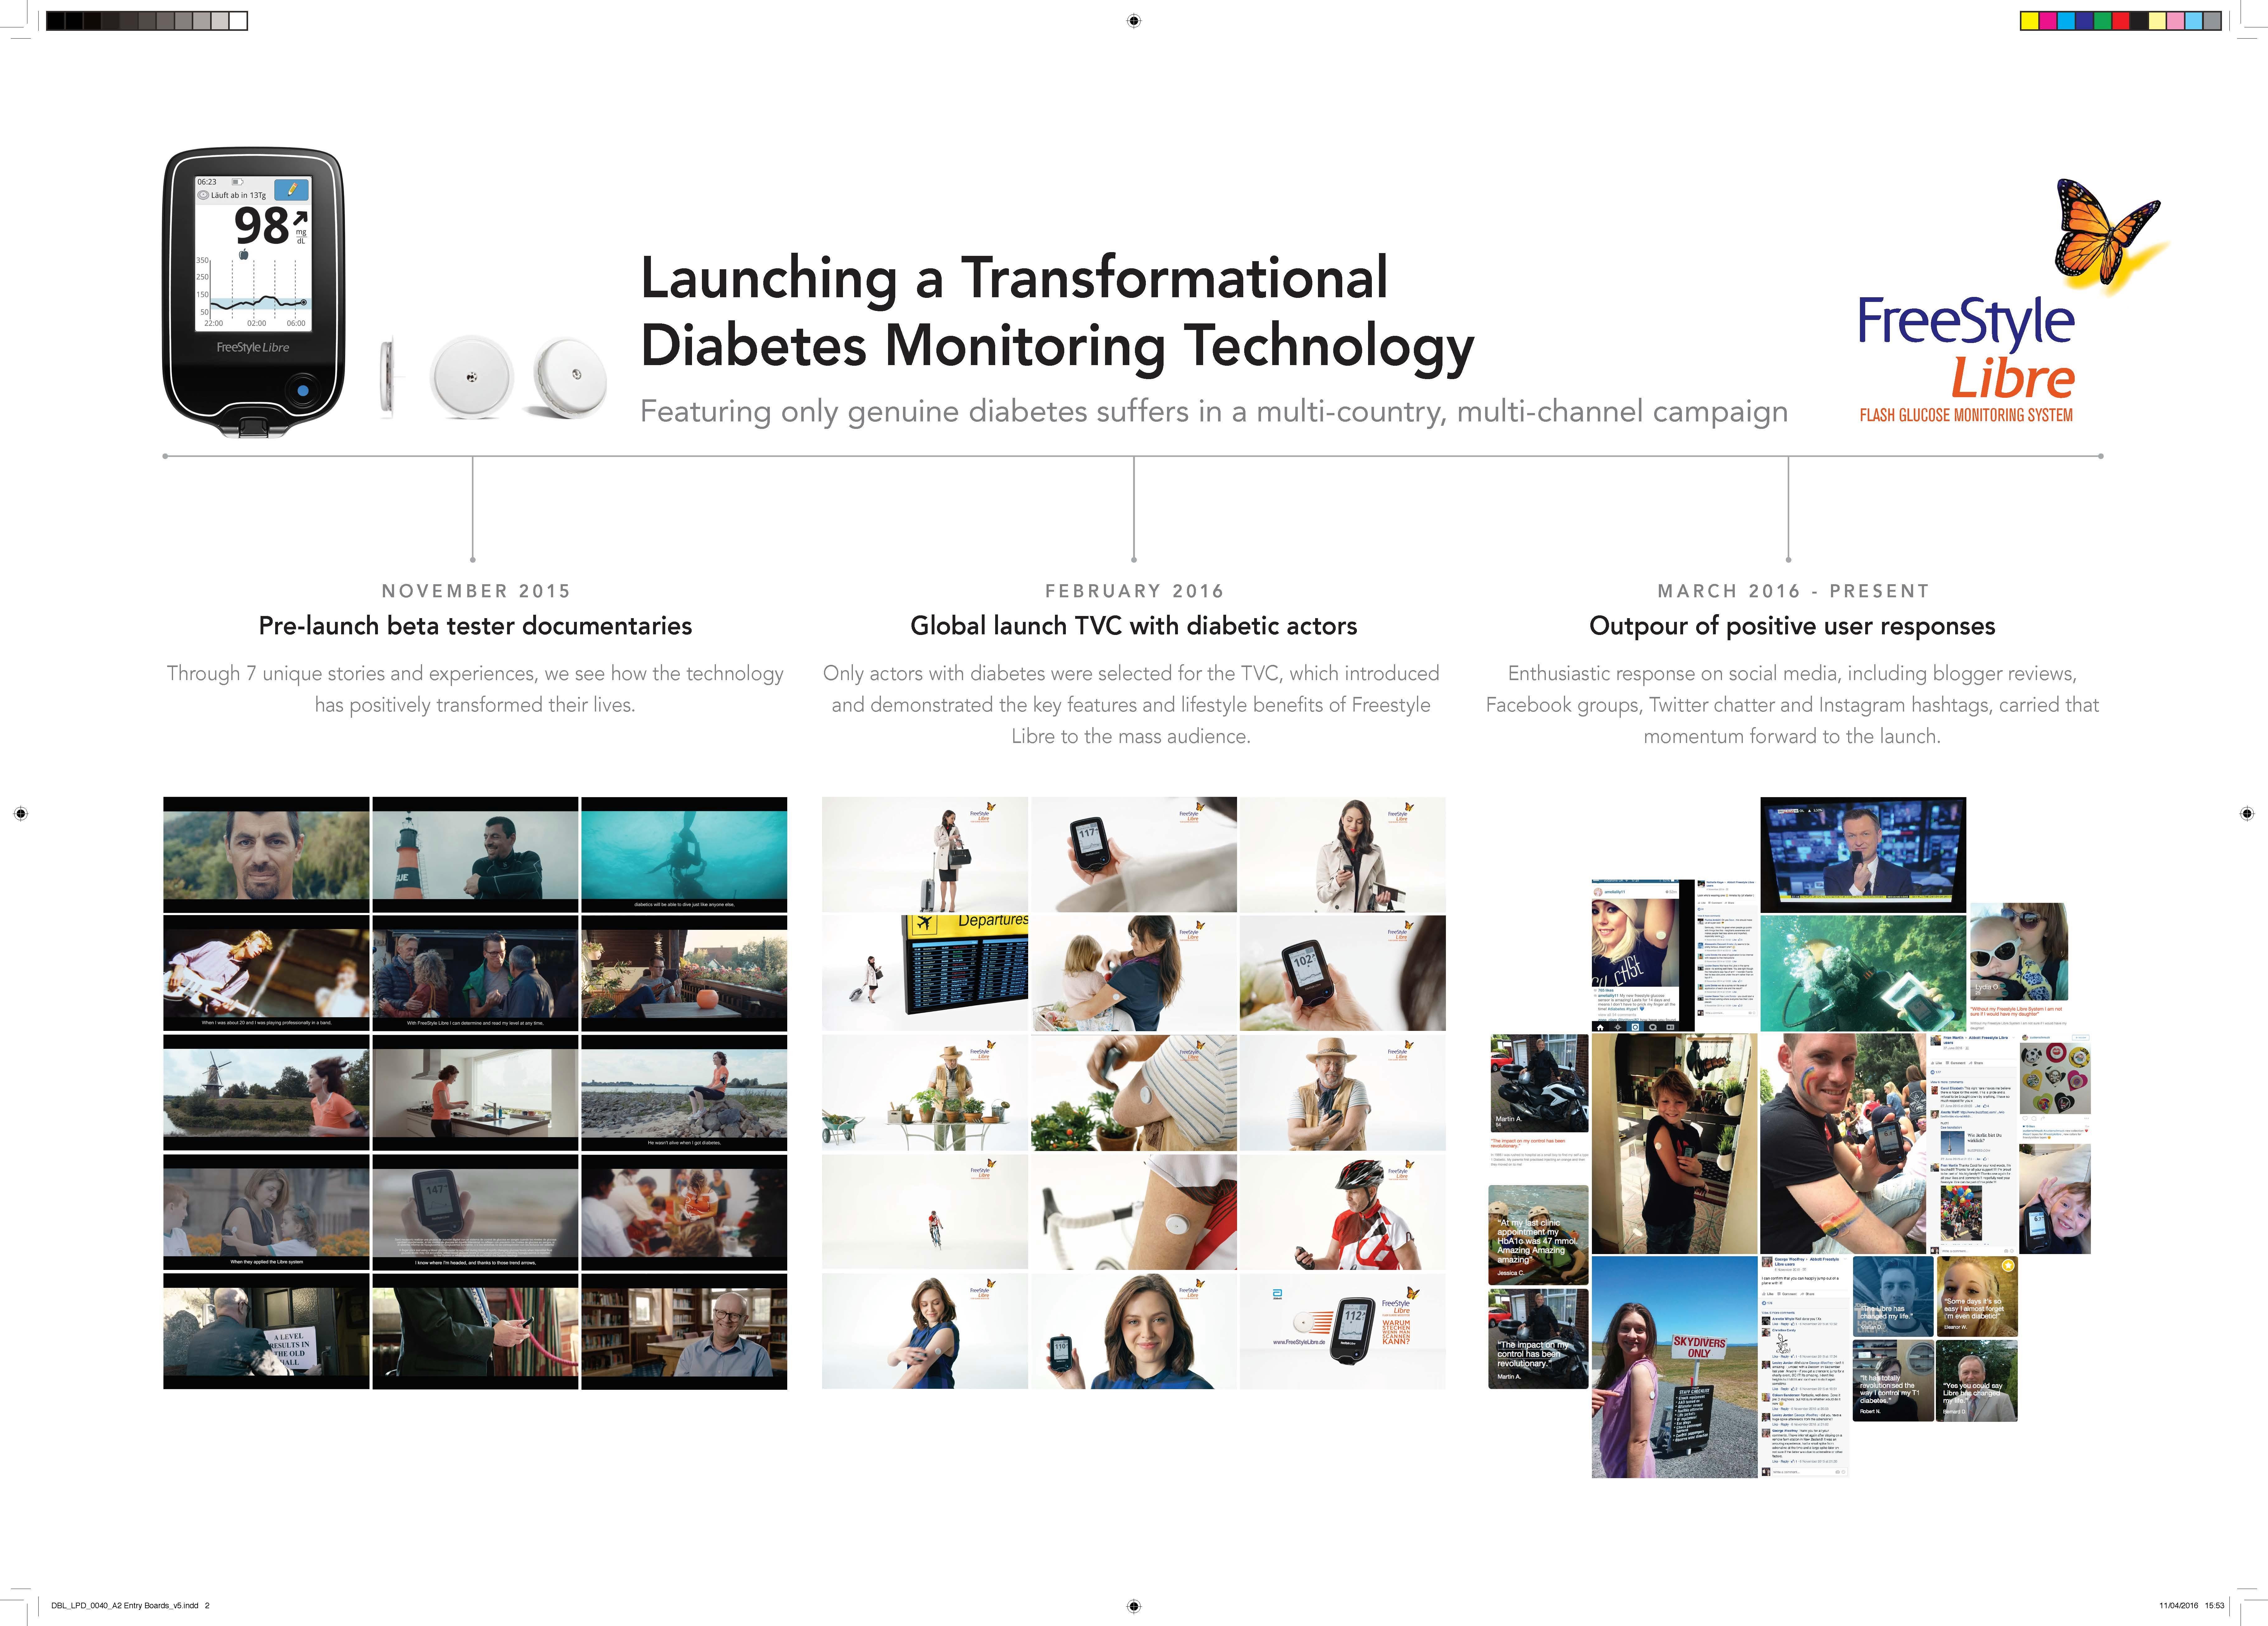 Freestyle Libre - Integrated Campaign